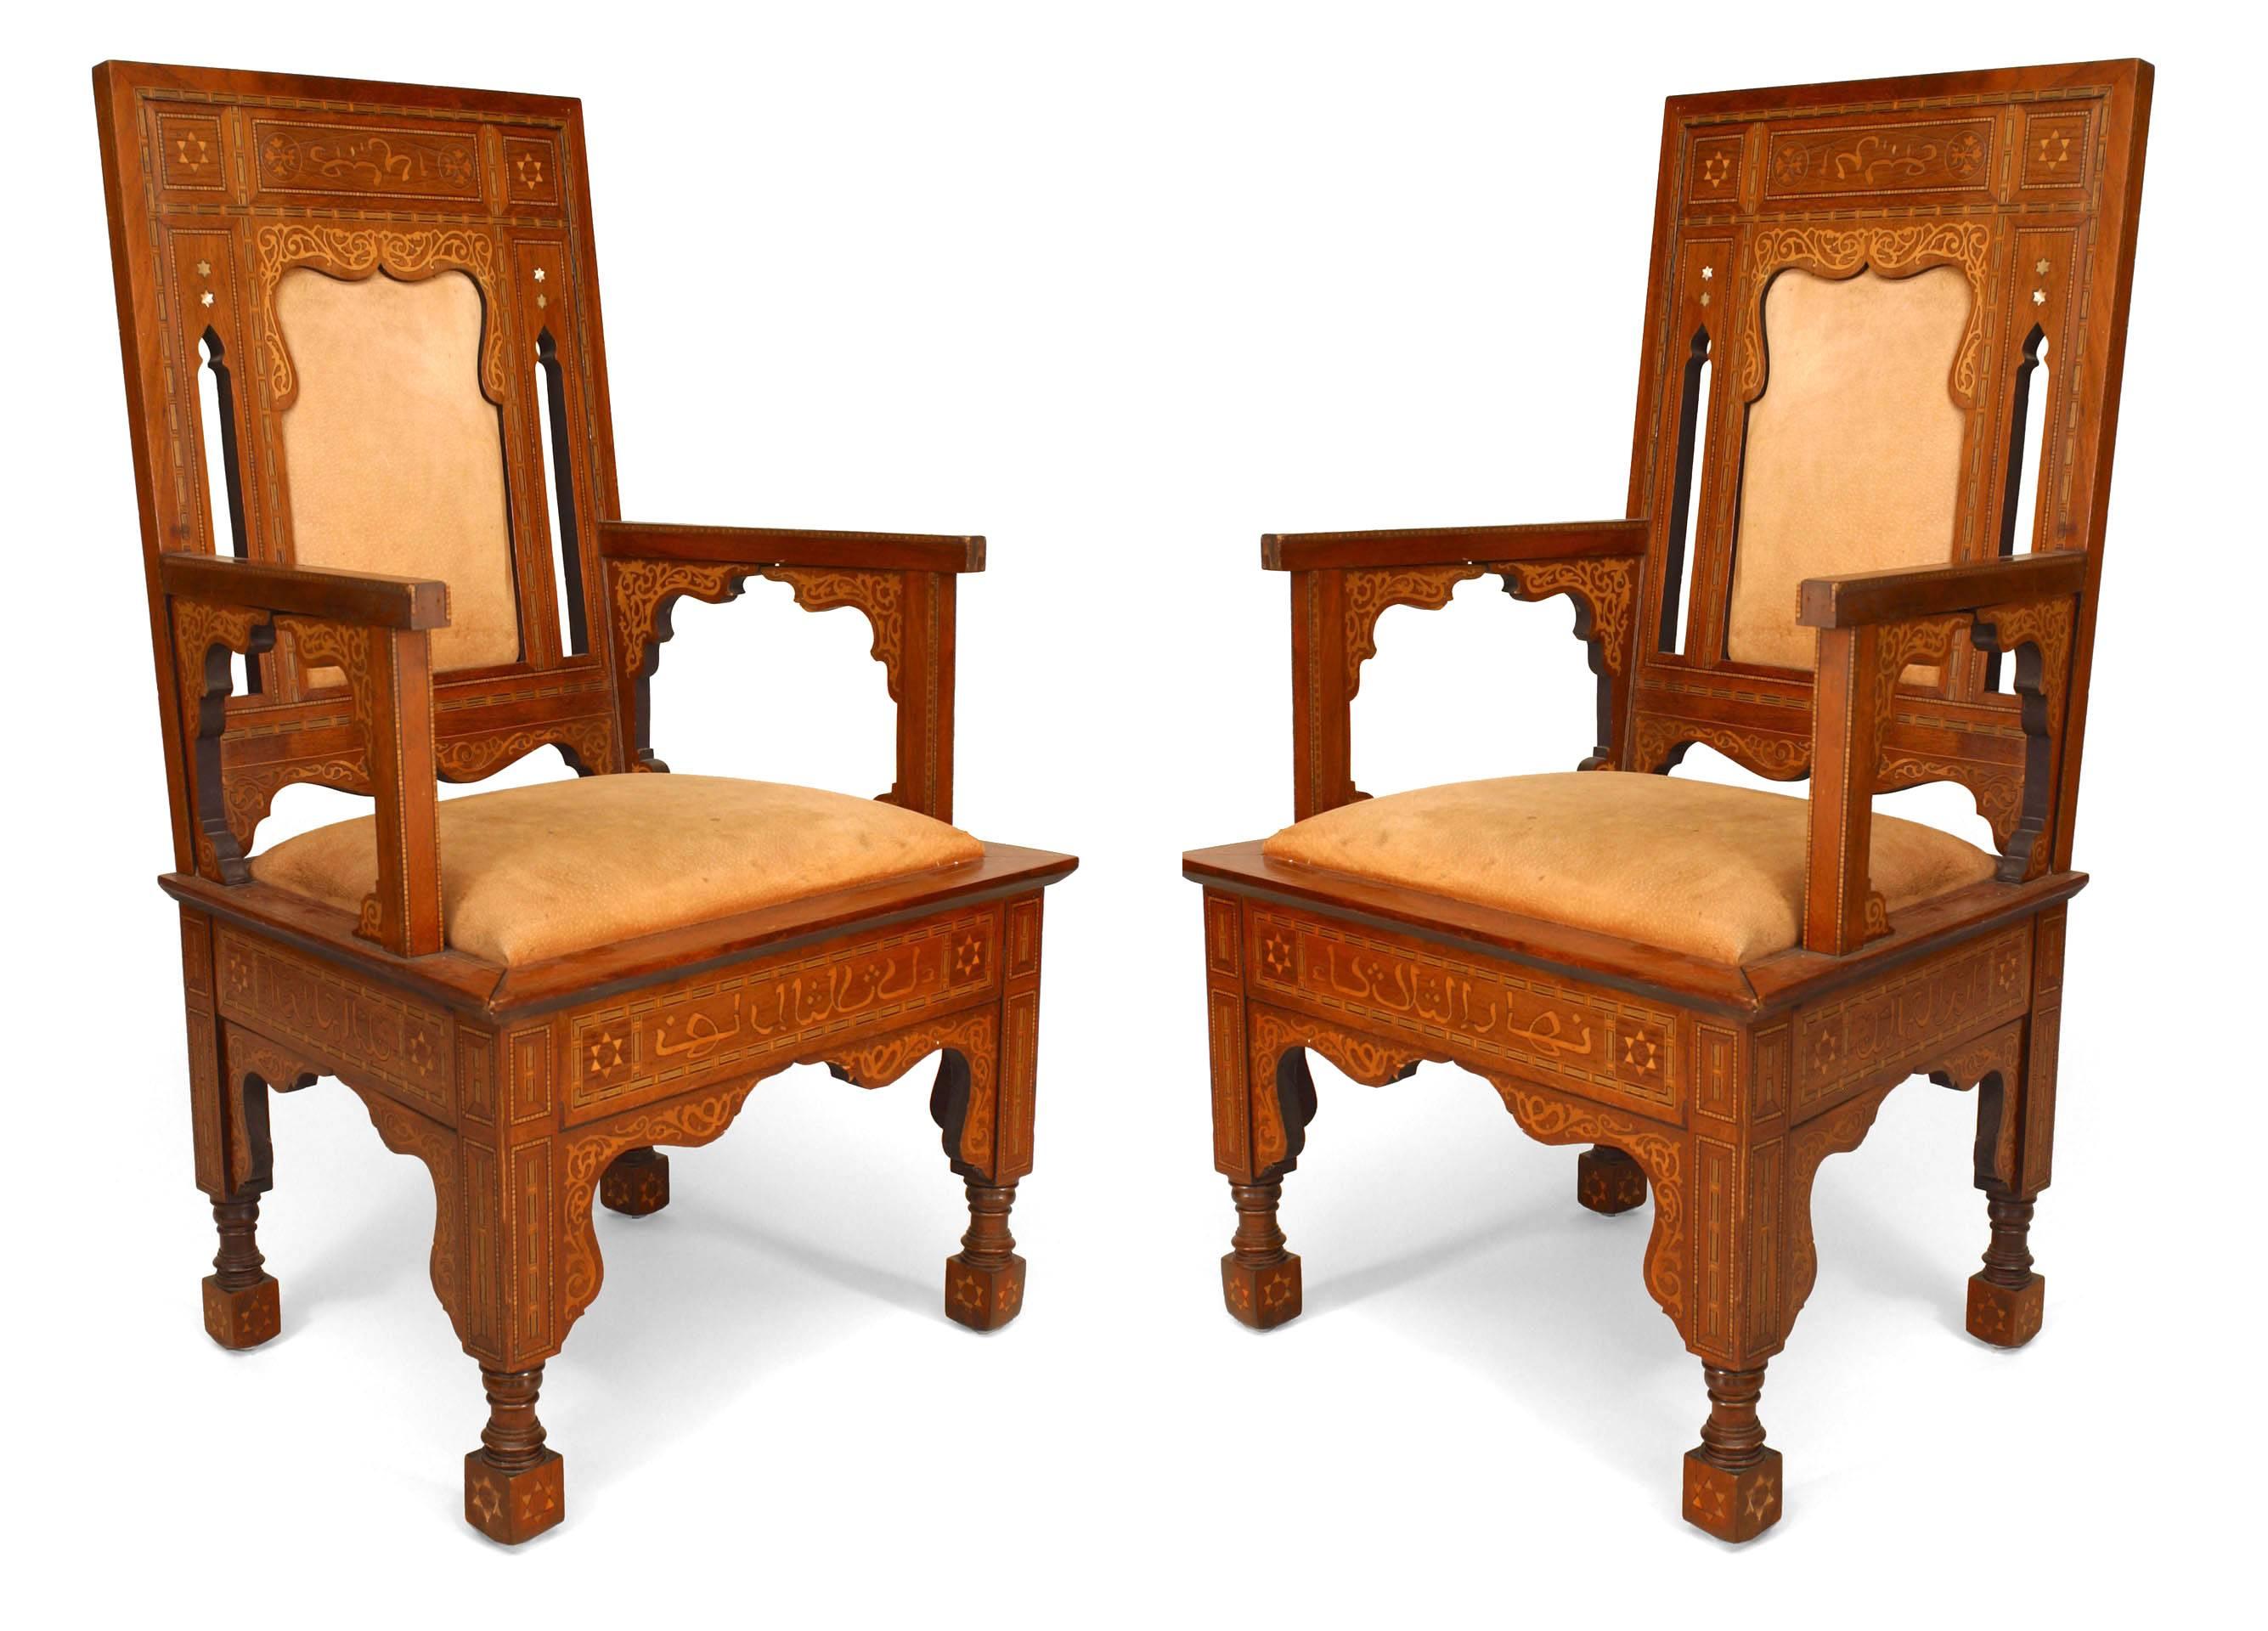 Pair of Middle Eastern Moorish/Syrian walnut Armchairs (19/20th Cent) with inlaid decoration and Arab script with an arch design cut out back and brown suede seat.
